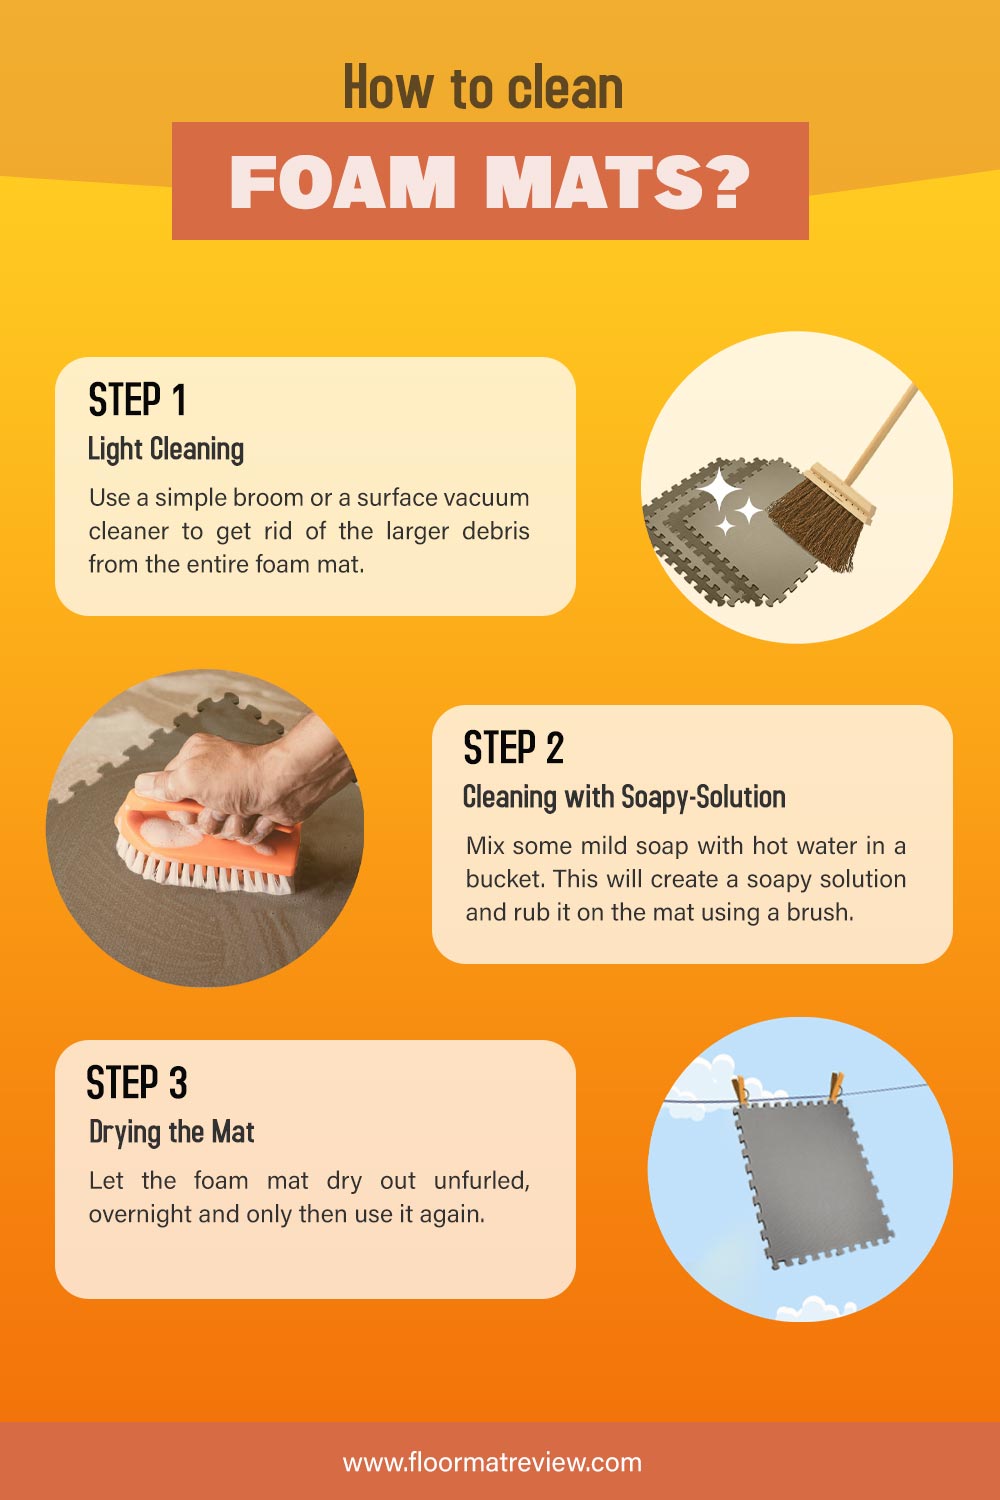 how-to-clean-foam-mats-step-by-step-process-explained